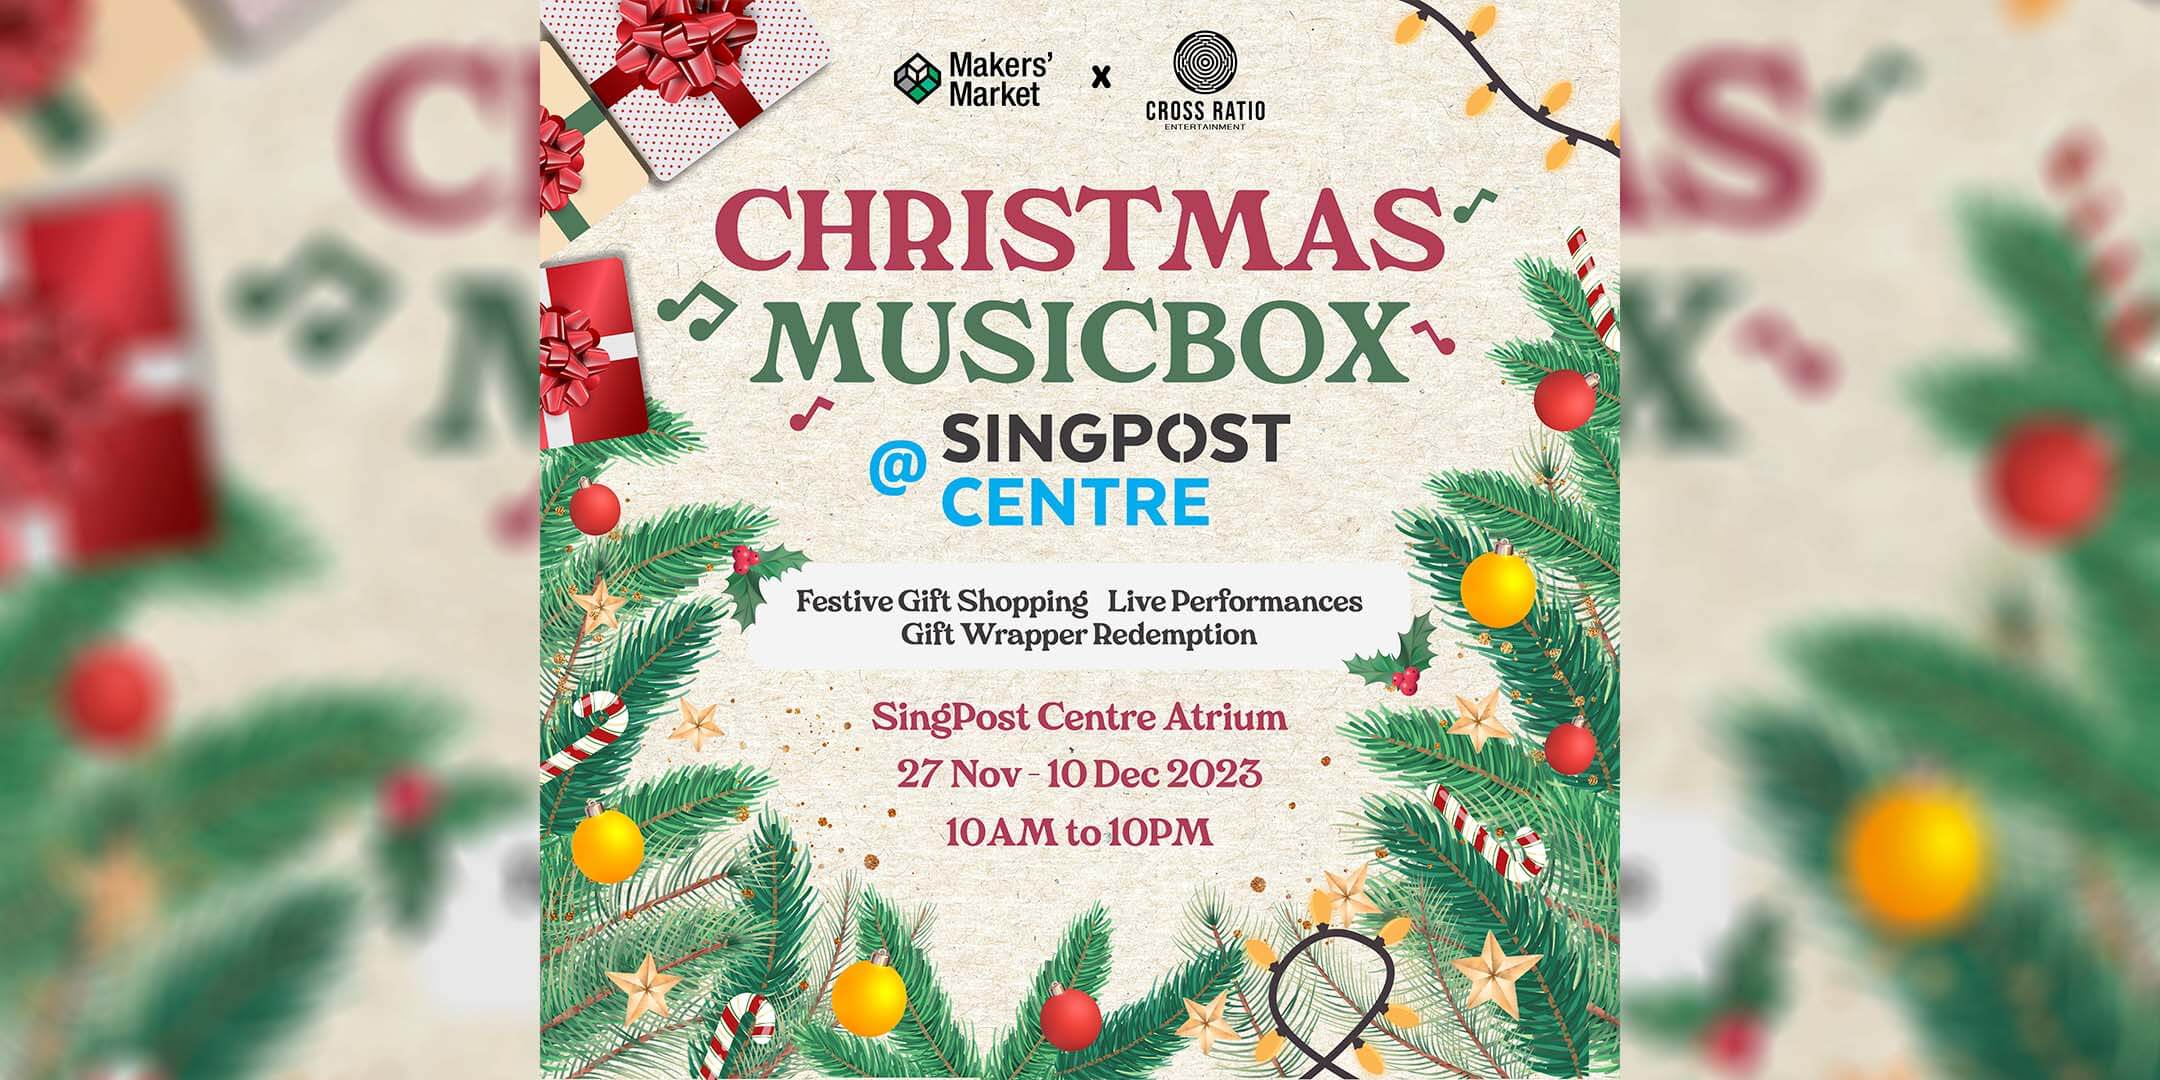 Christmas Musicbox @ SingPost Centre